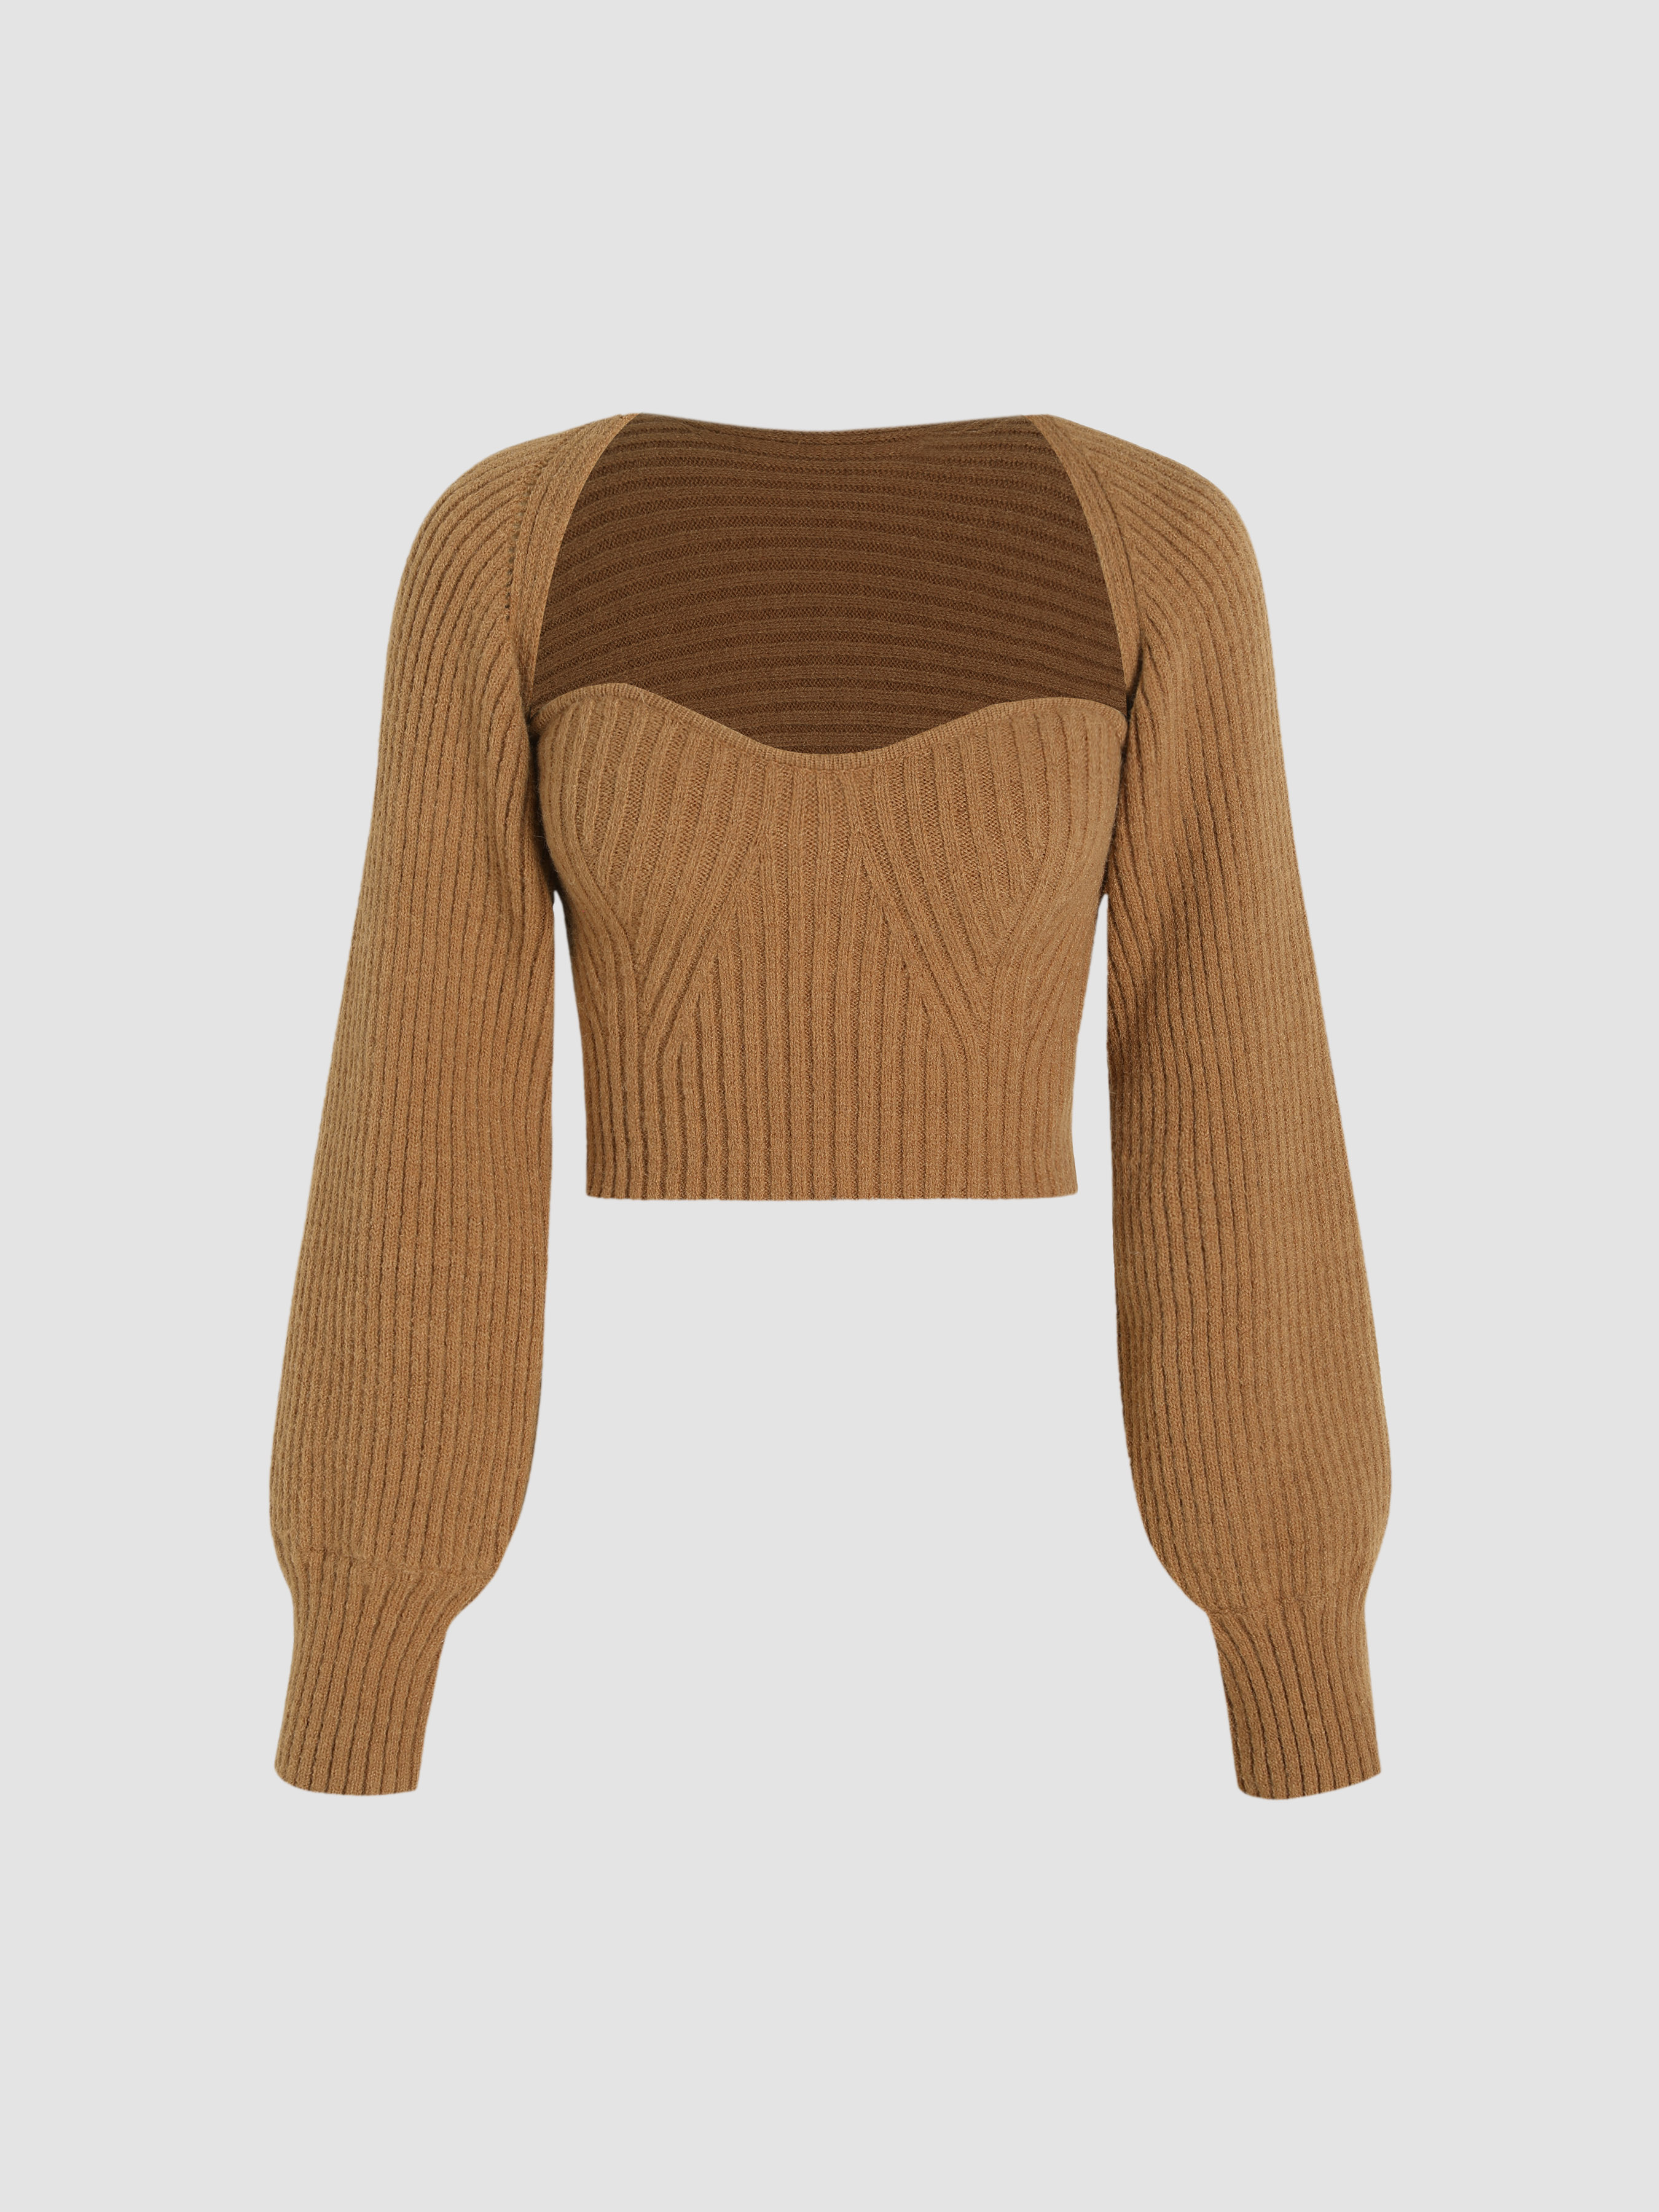 McKenna Basic Long Sleeve Crop Top  Casual knitwear, Clothes, 2000s  clothing